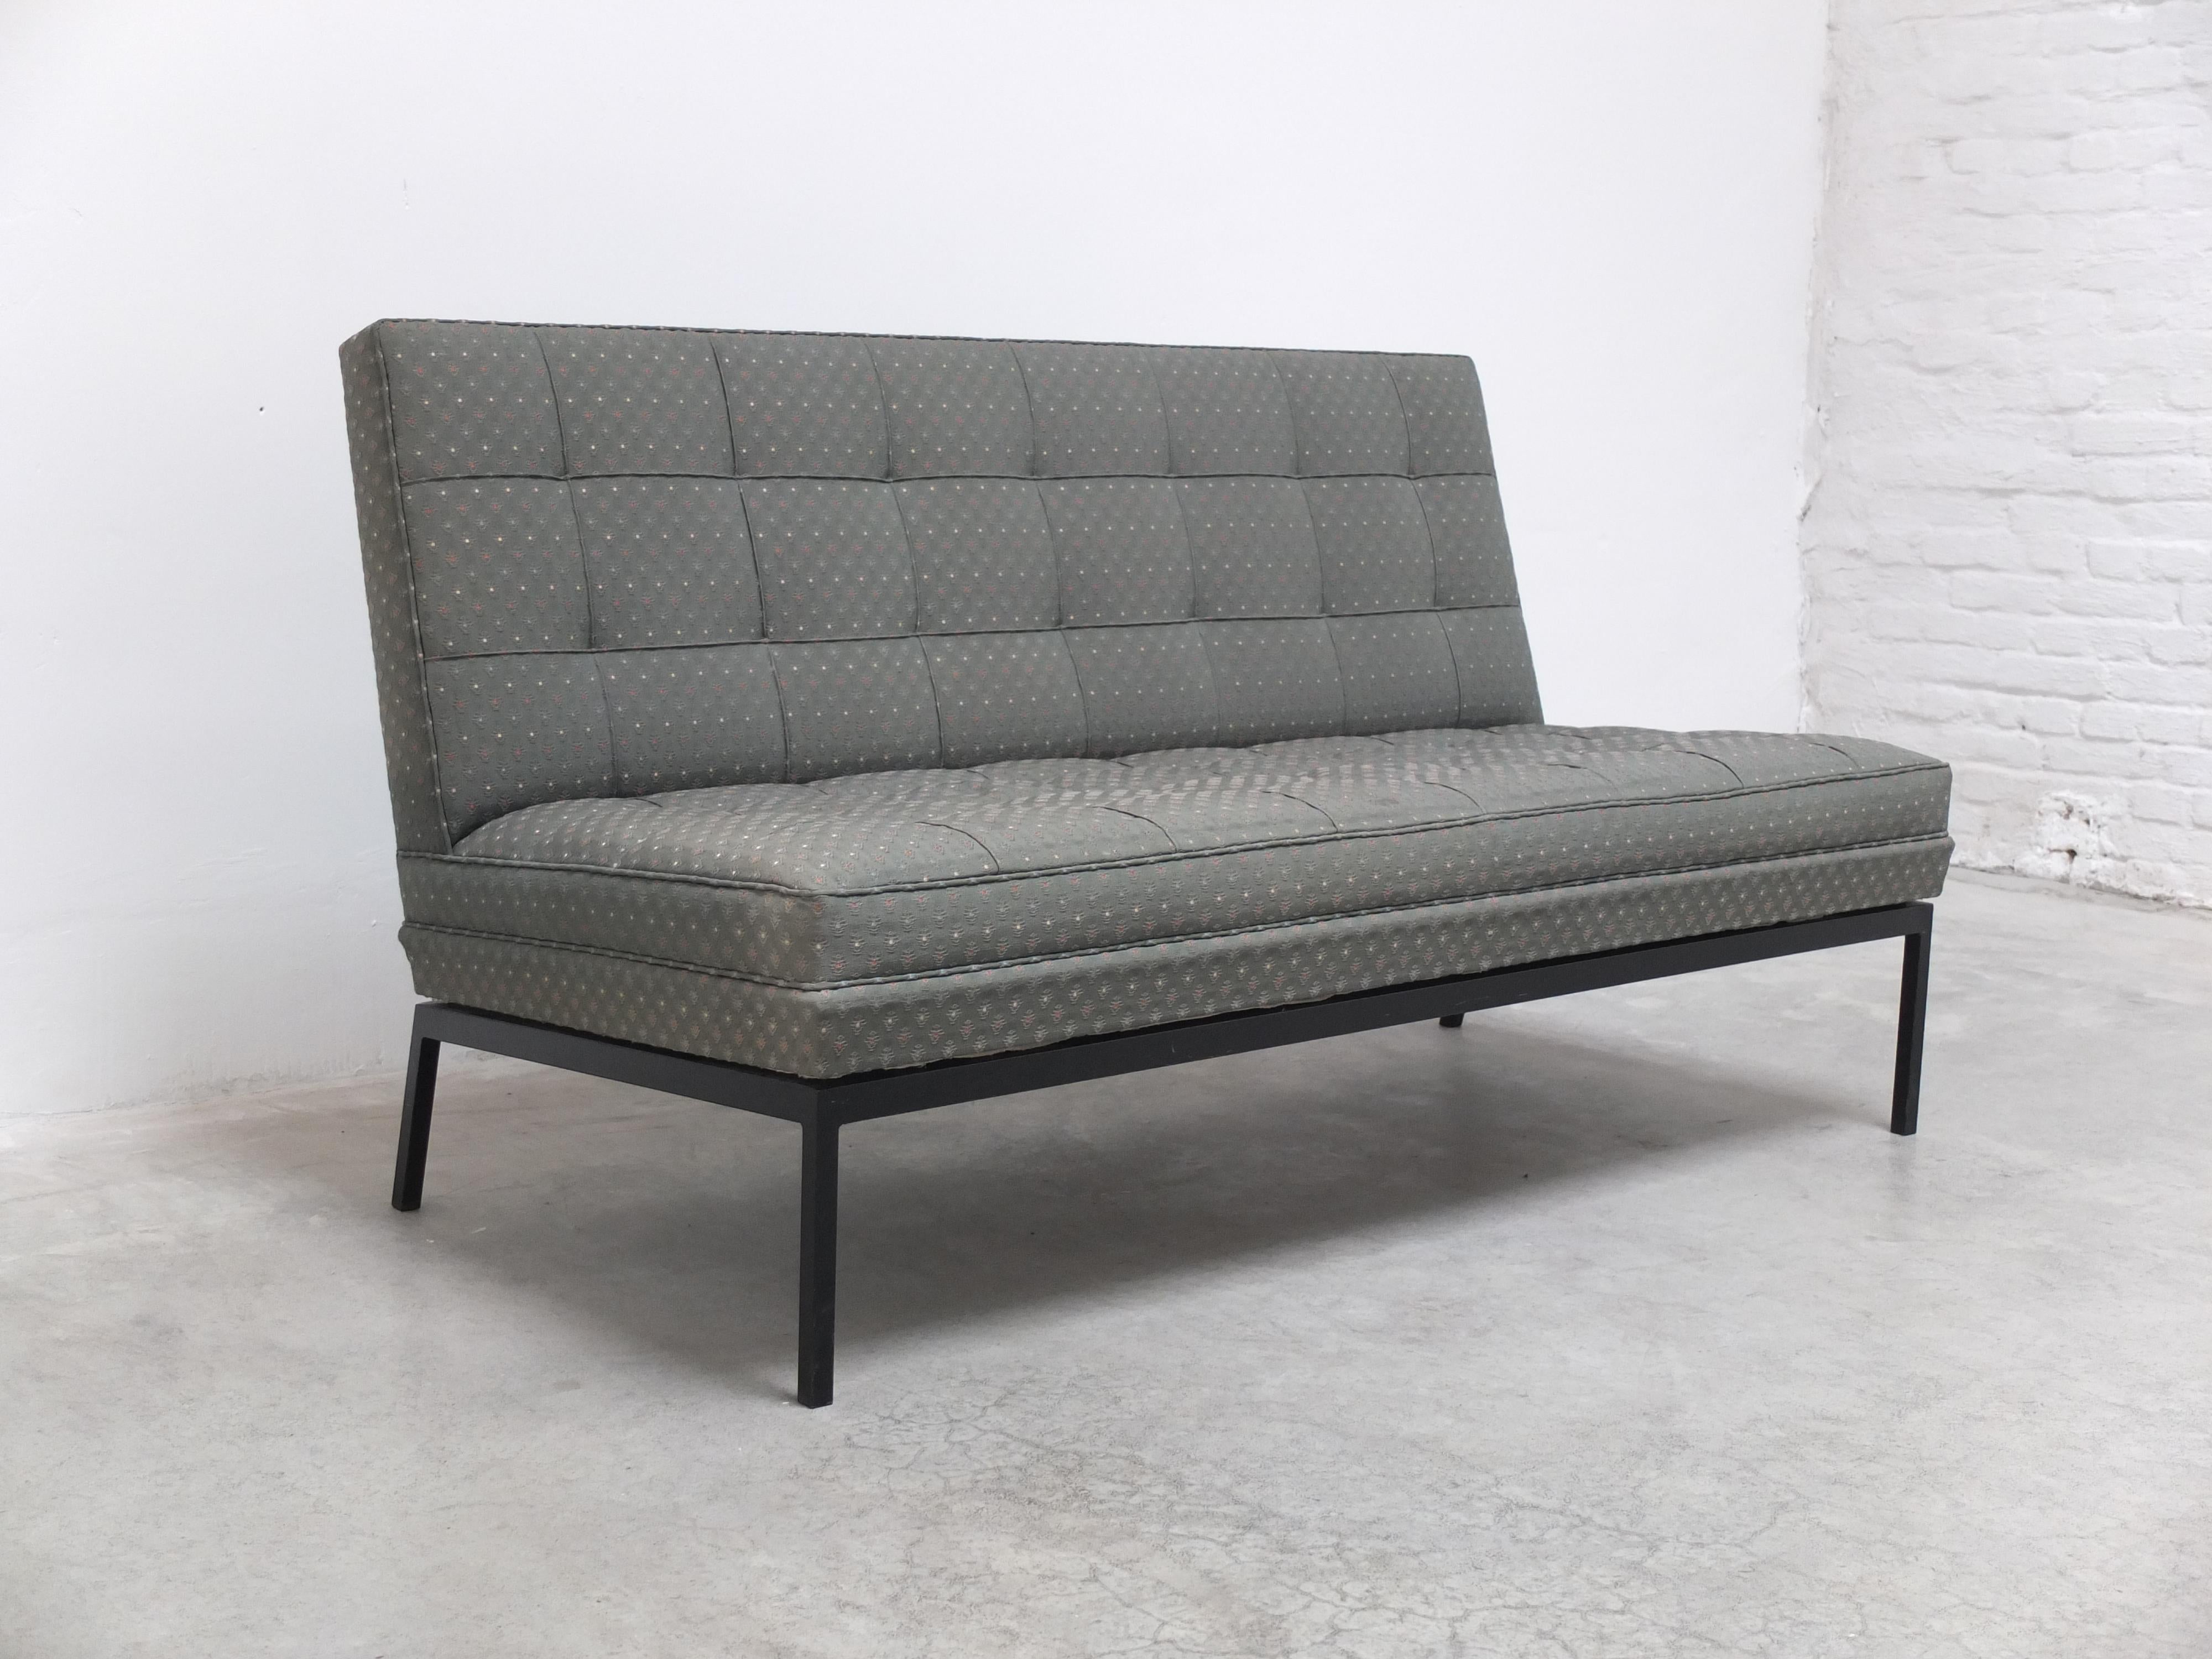 American Rare 'Model 66' 2-Seater Sofa by Florence Knoll for Knoll International, 1950s For Sale